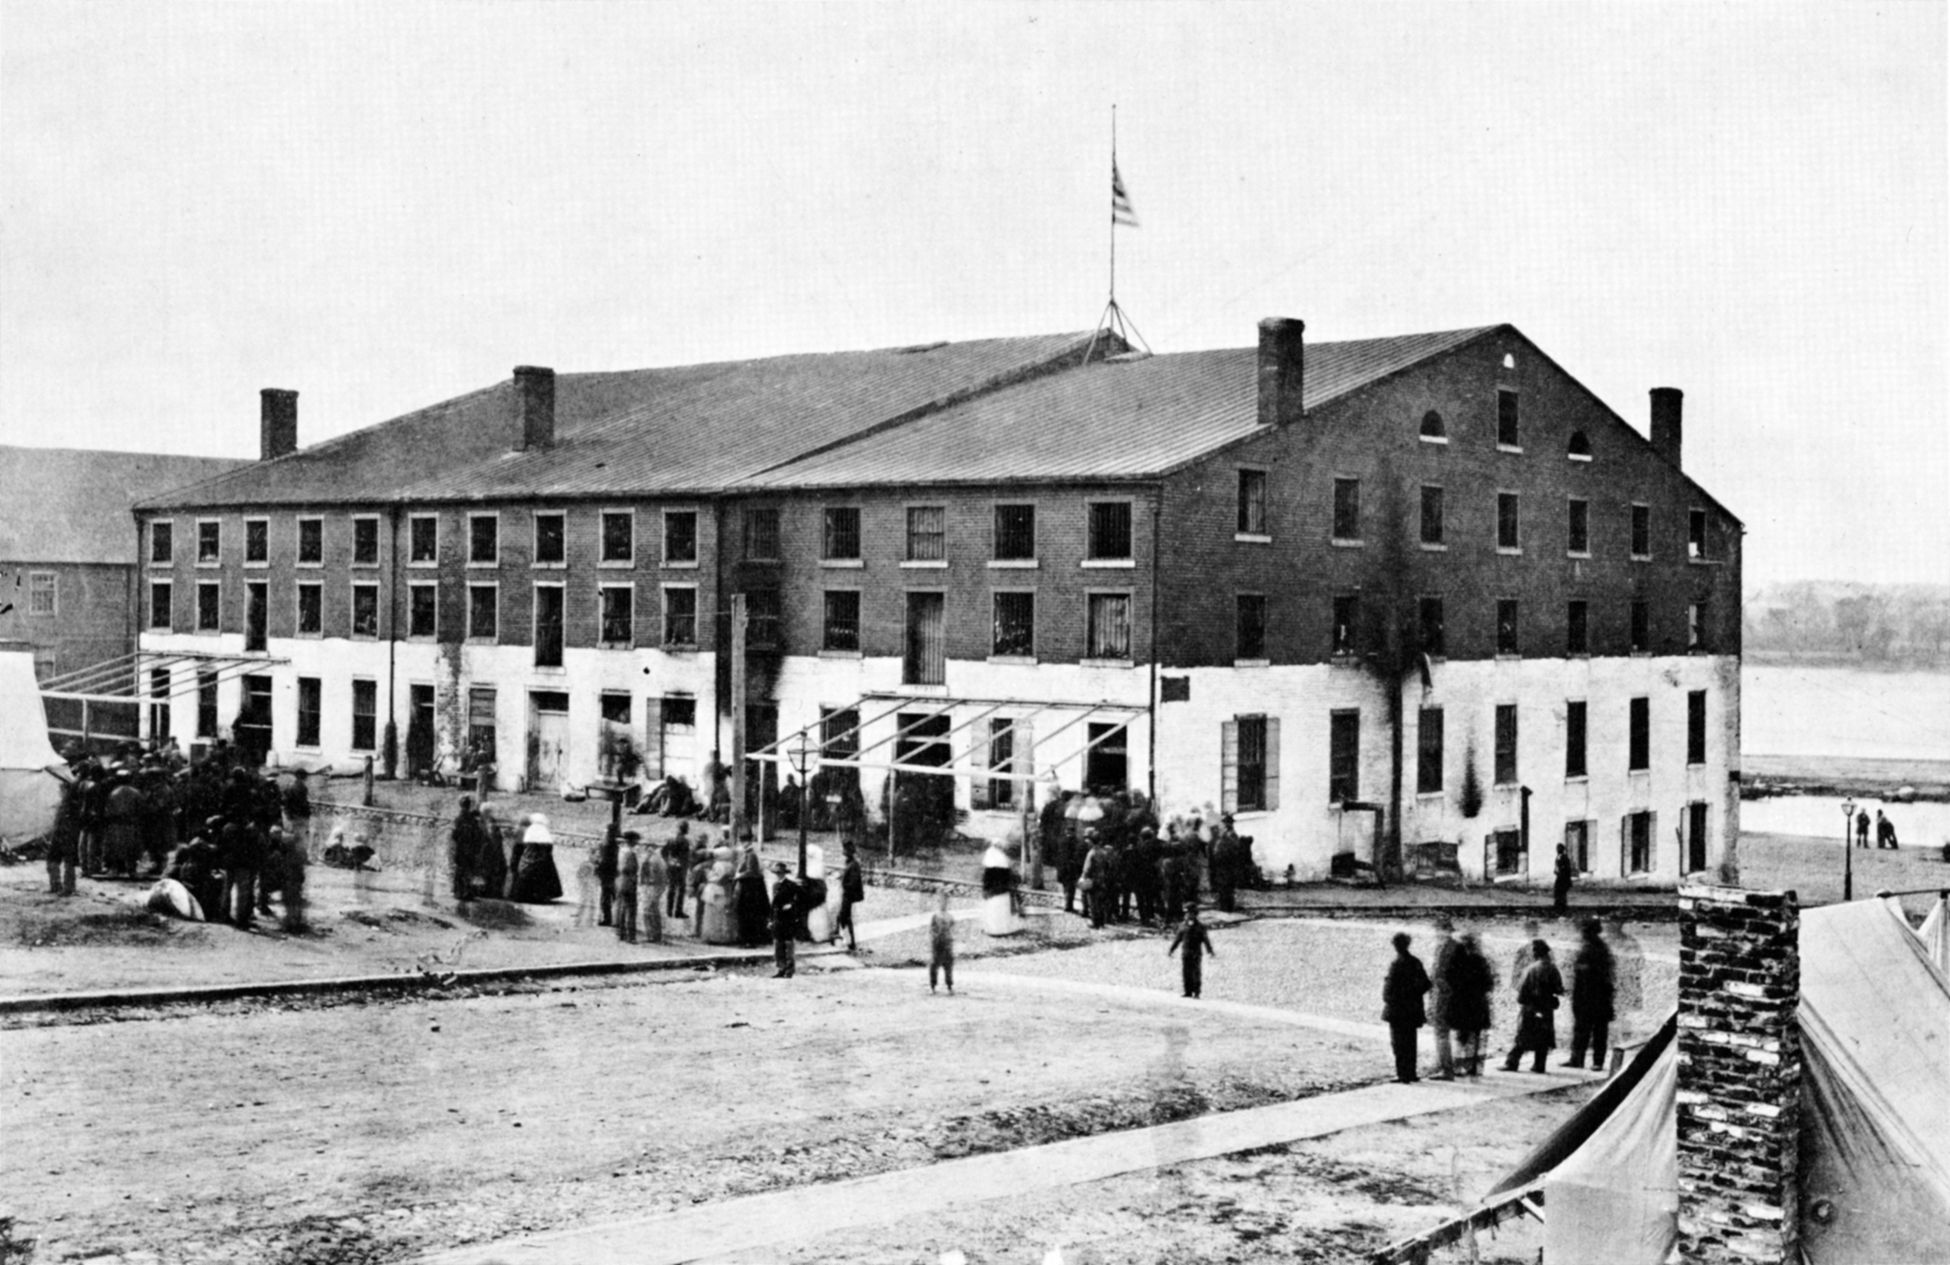 Libby Prison in Richmond, Virginia, was part of the provost marshal’s chain of responsibility. It is shown following its liberation by Union troops in April 1865.